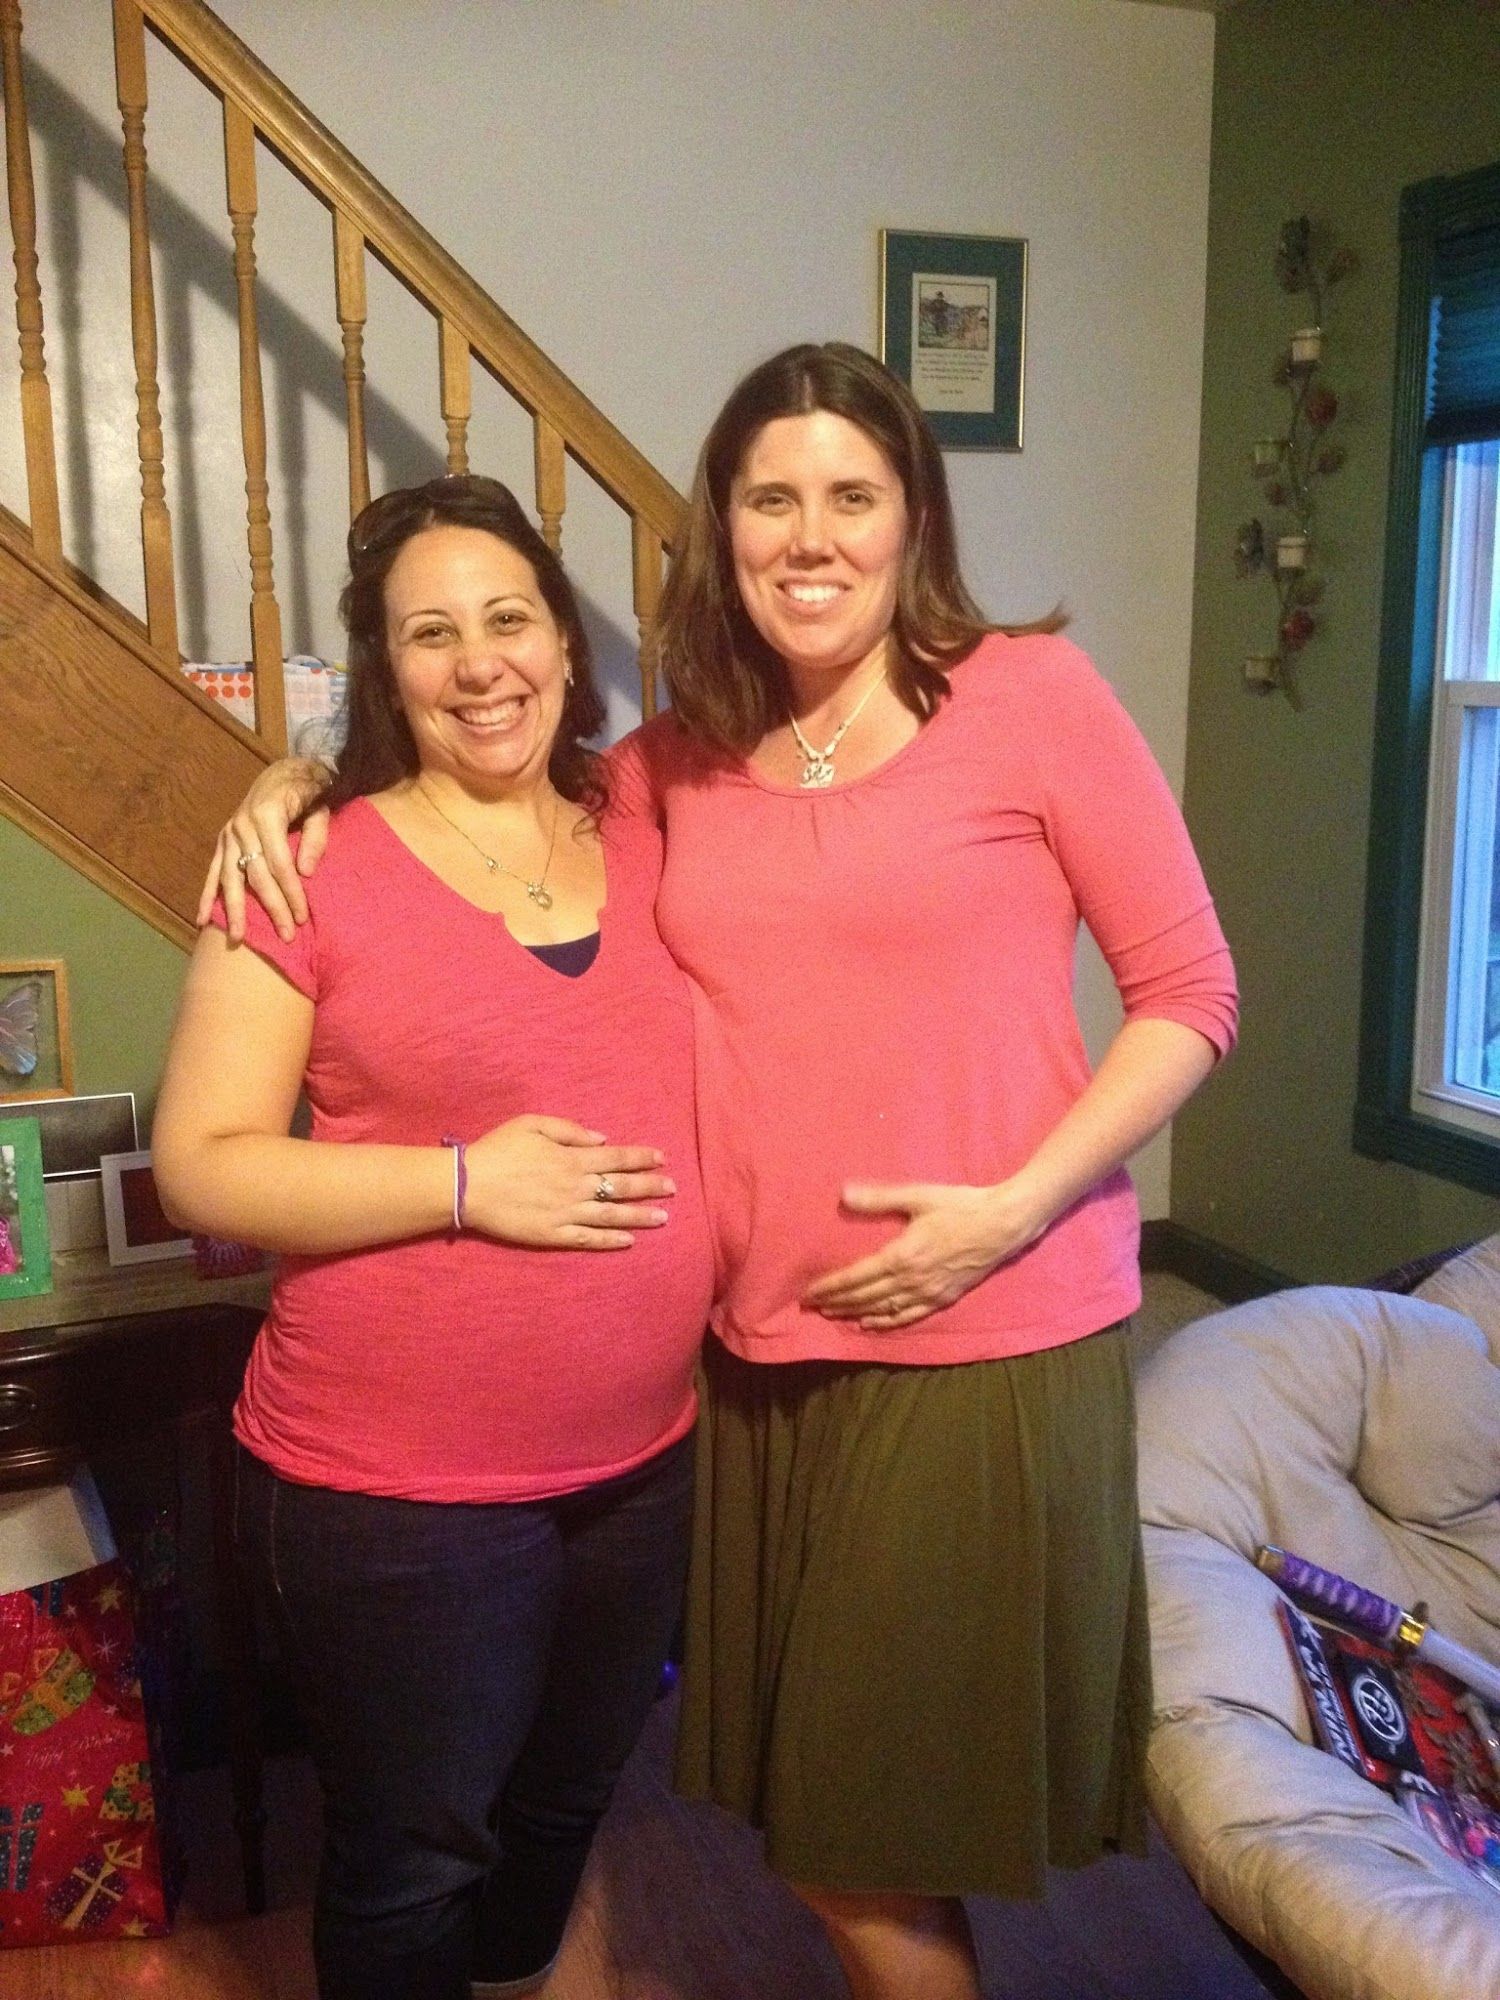  My Best friend and I pregnant with our fourth babies.I'm about 12 weeks pregnant and I think she is about 20 weeks pregnant.She's having a boy an I am having a girl! 